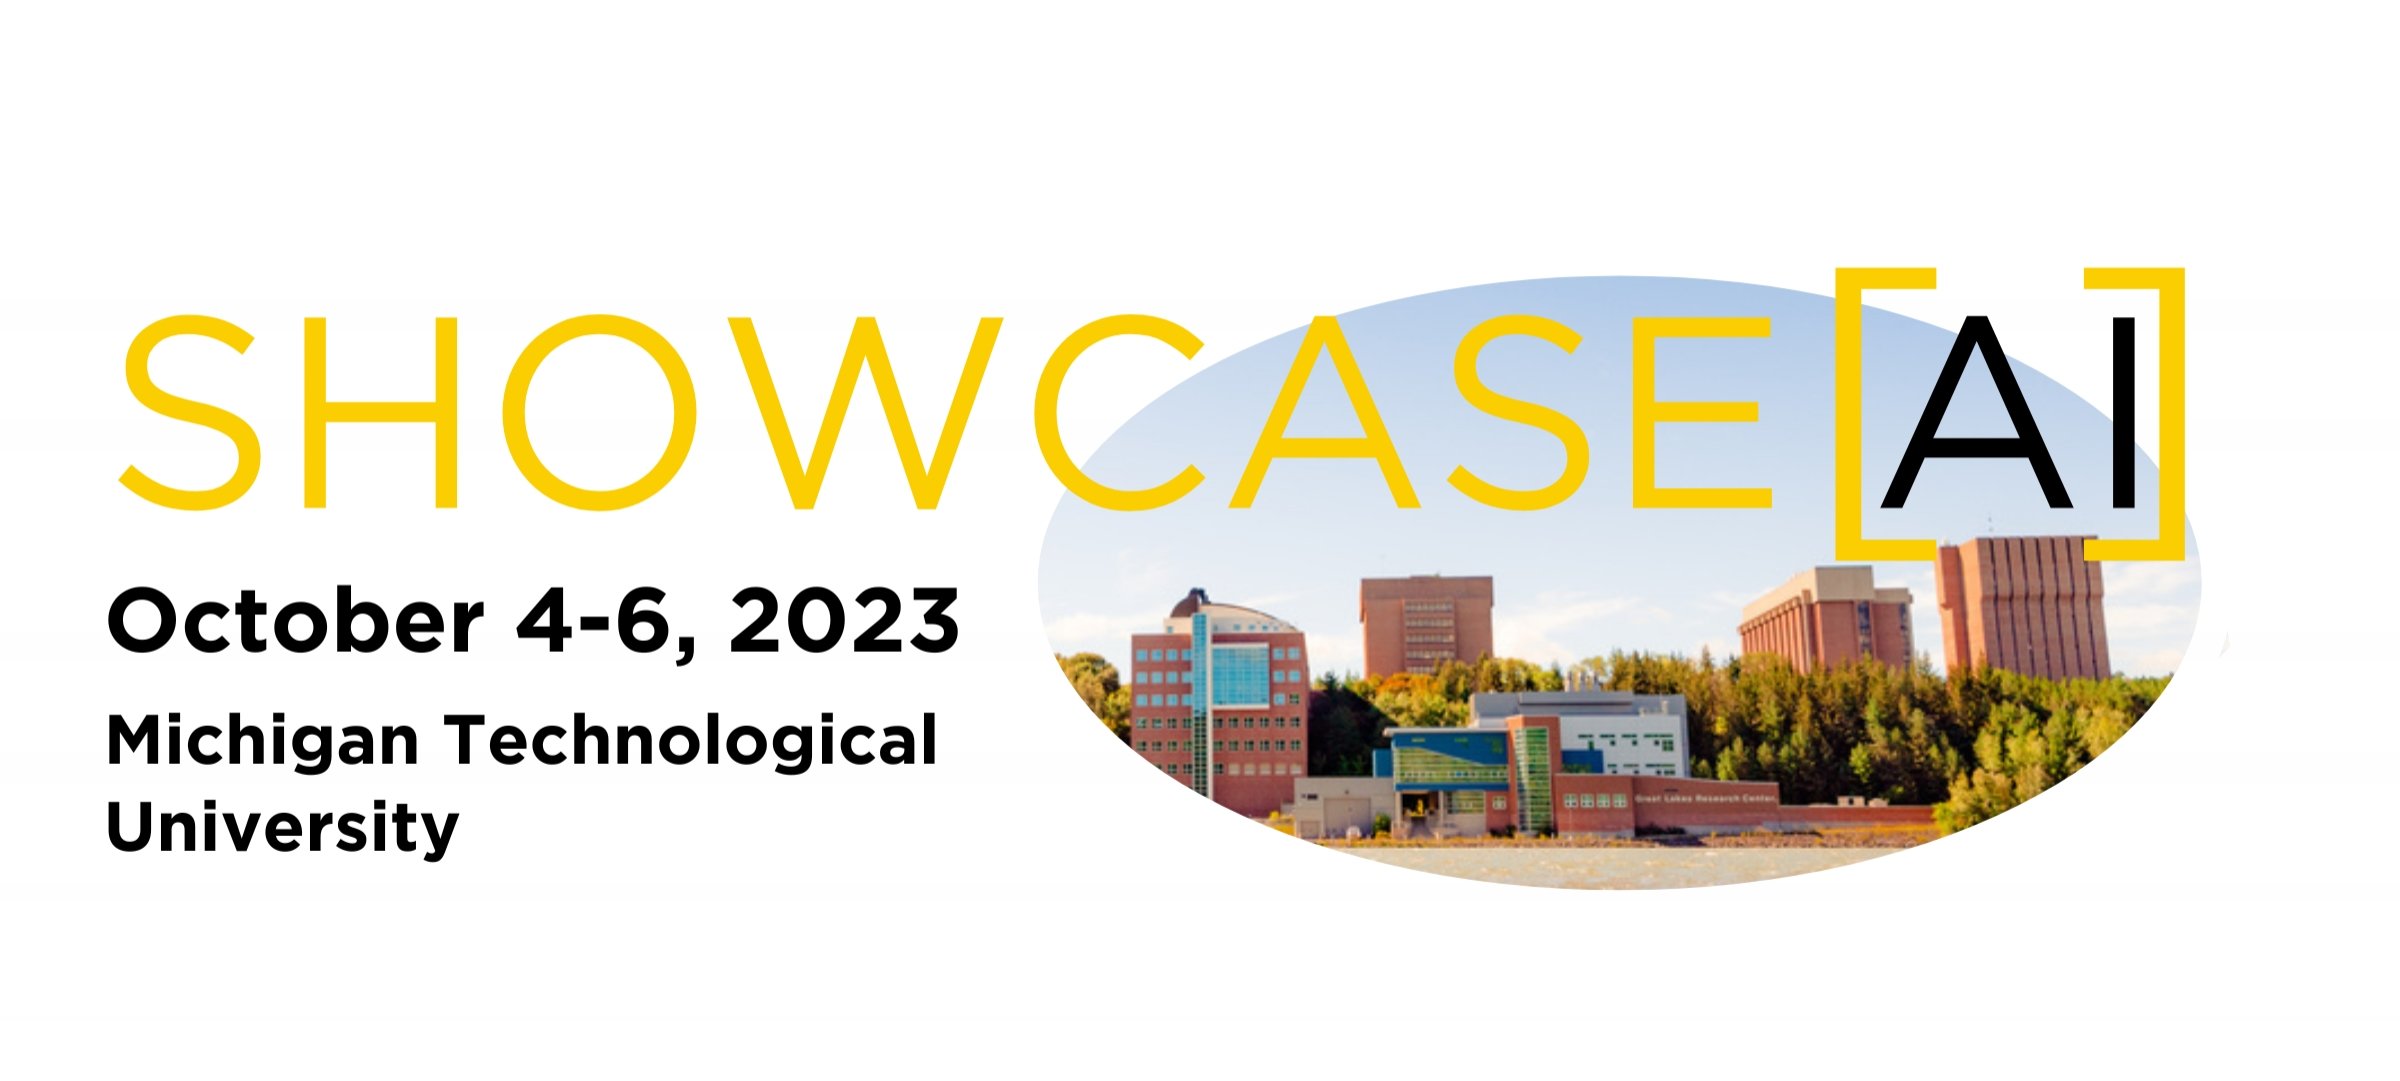 Showcase AI October 4-6, 2023, Michigan Technological University with a photo of the campus from across the waterway.